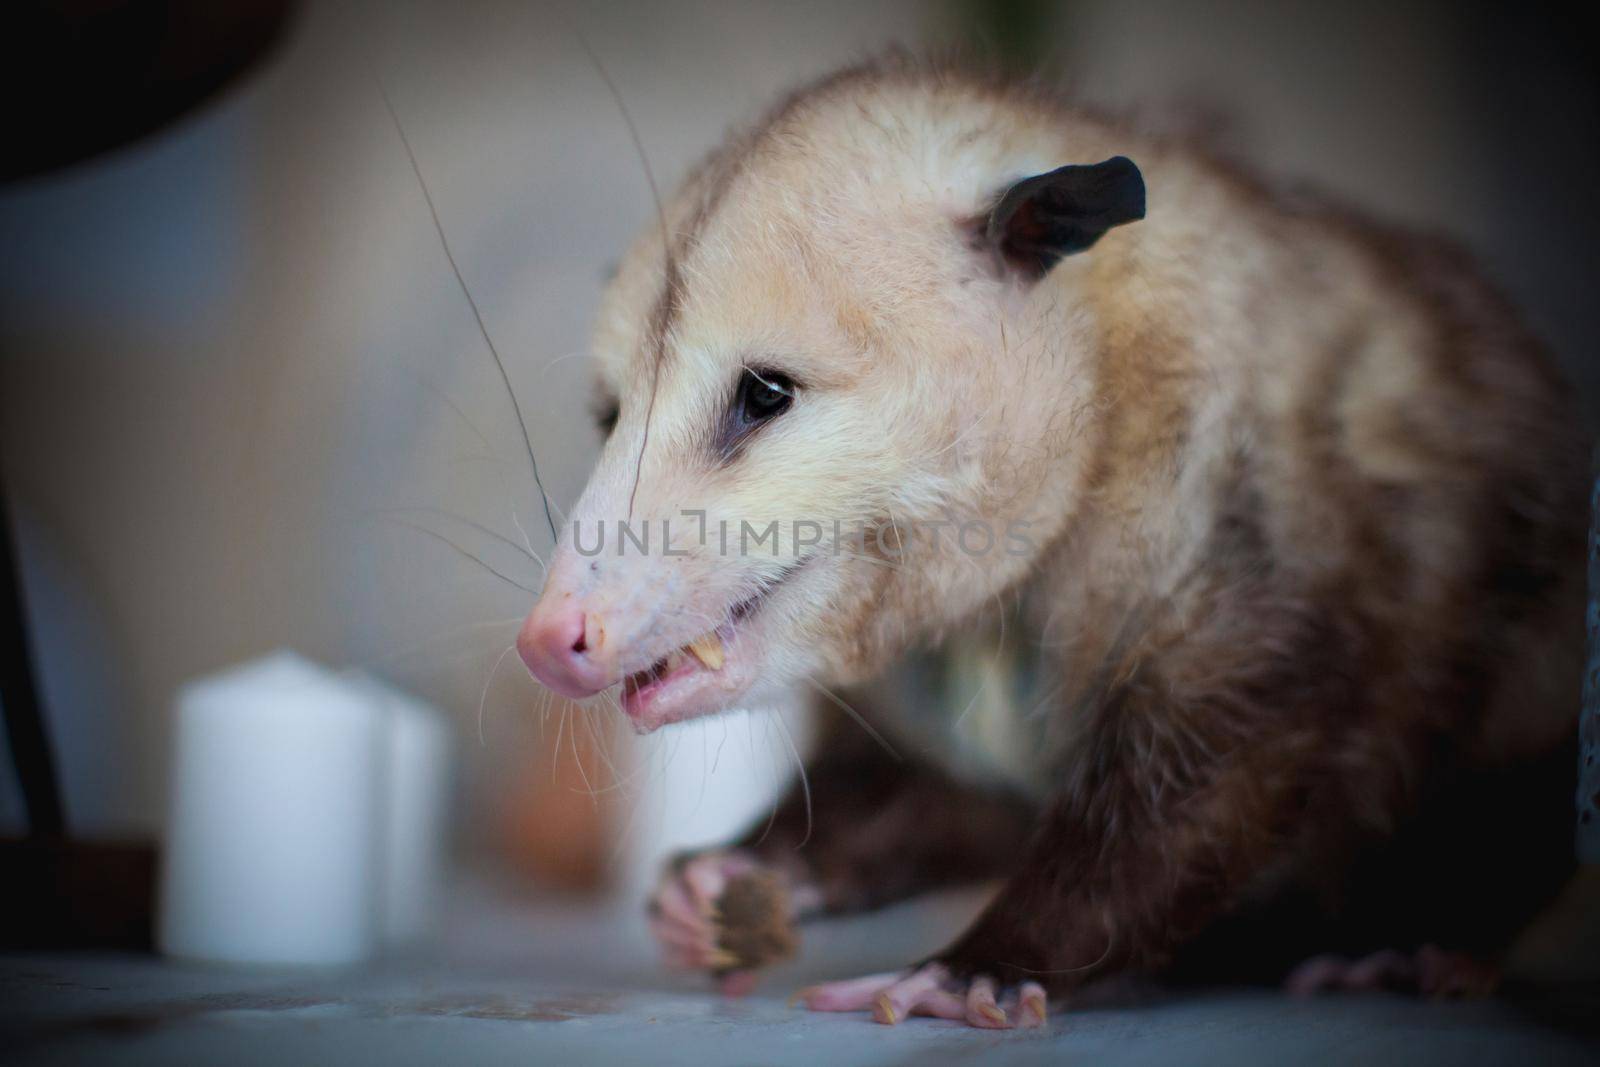 The Virginia opossum, Didelphis virginiana, on a table by RosaJay